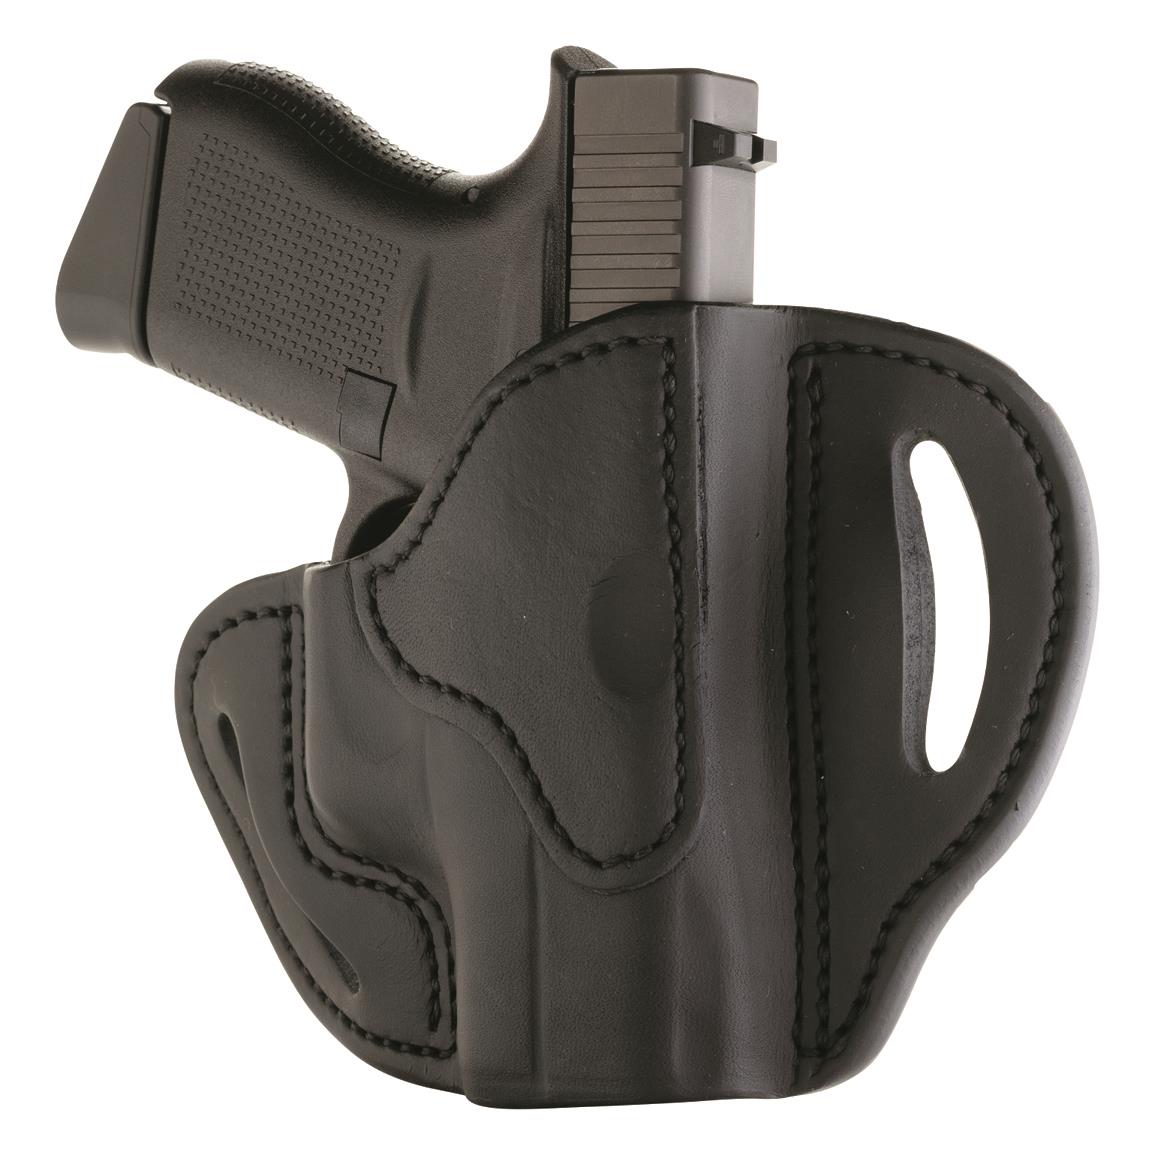 1791 Gunleather BHC OWB Holster, Multi-Fit Compact